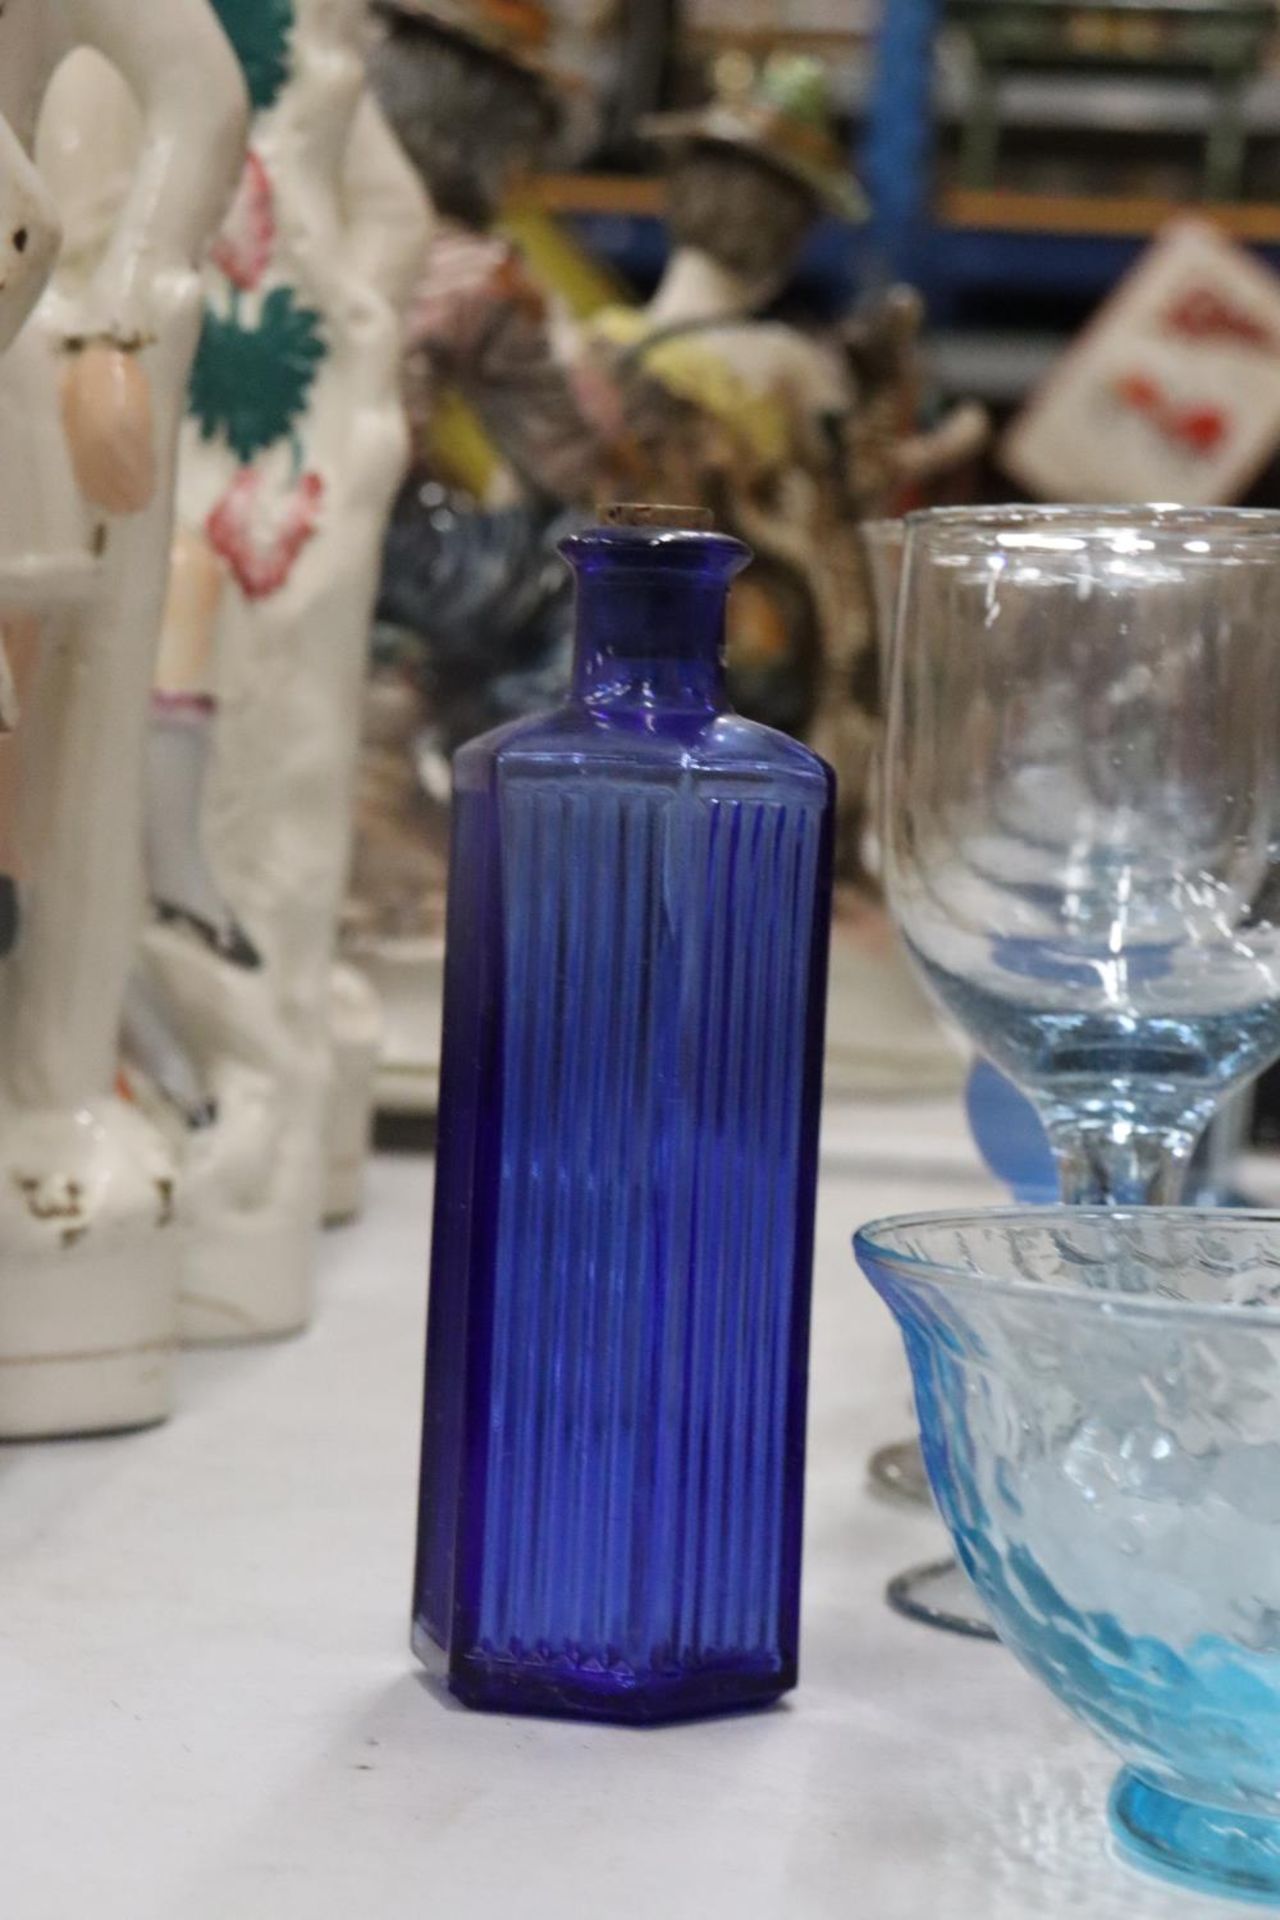 VARIOUS BLUE GLASS ITEMS TO INCLUDE GLASSES, BOWL AND BOTTLE - Image 3 of 8